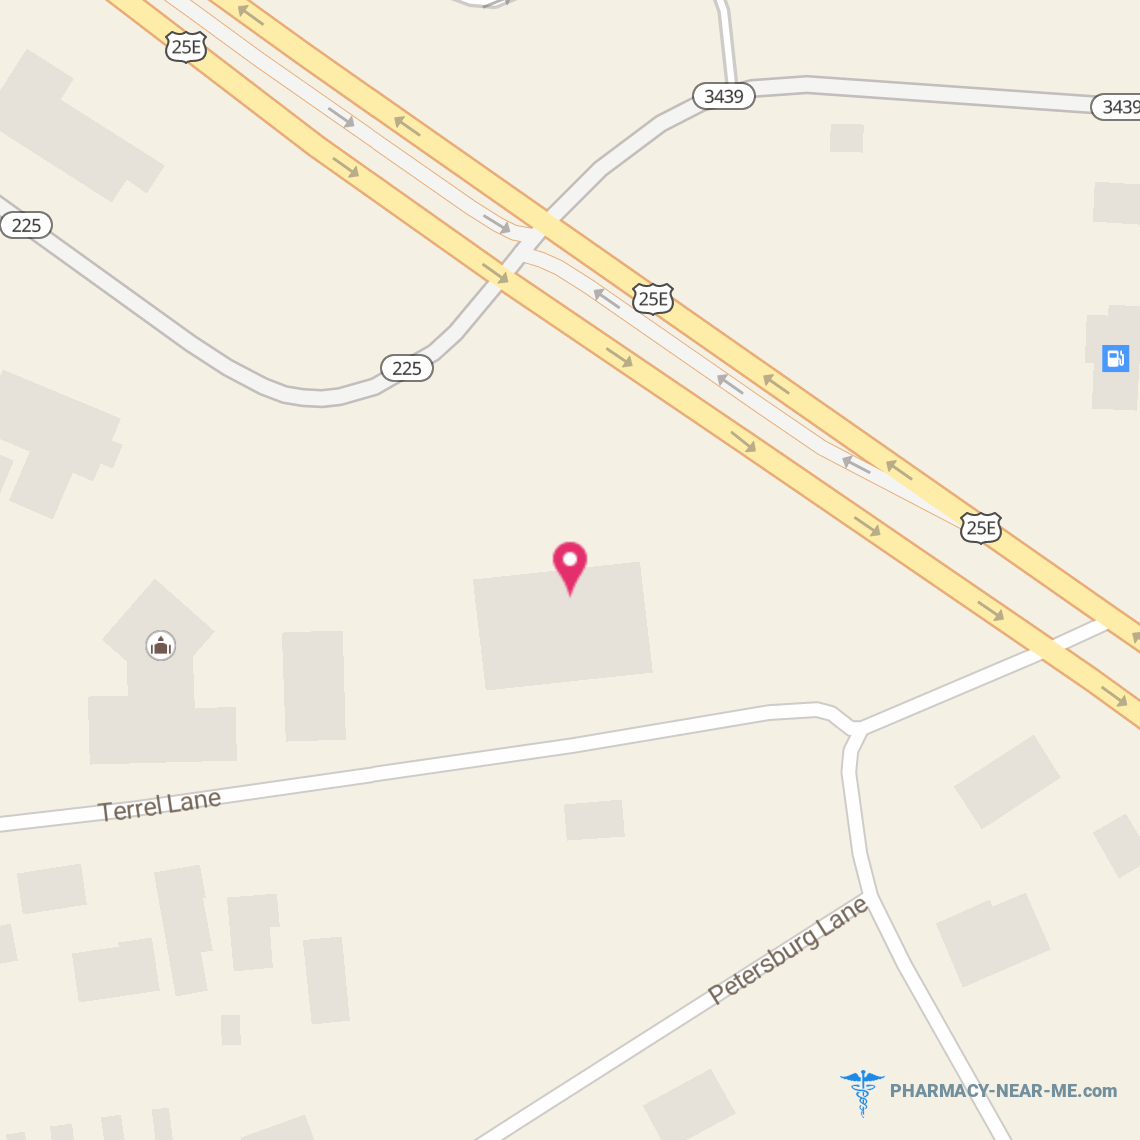 WALGREEN CO - Pharmacy Hours, Phone, Reviews & Information: 297 Terrel Lane, Barbourville, Kentucky 40906, United States